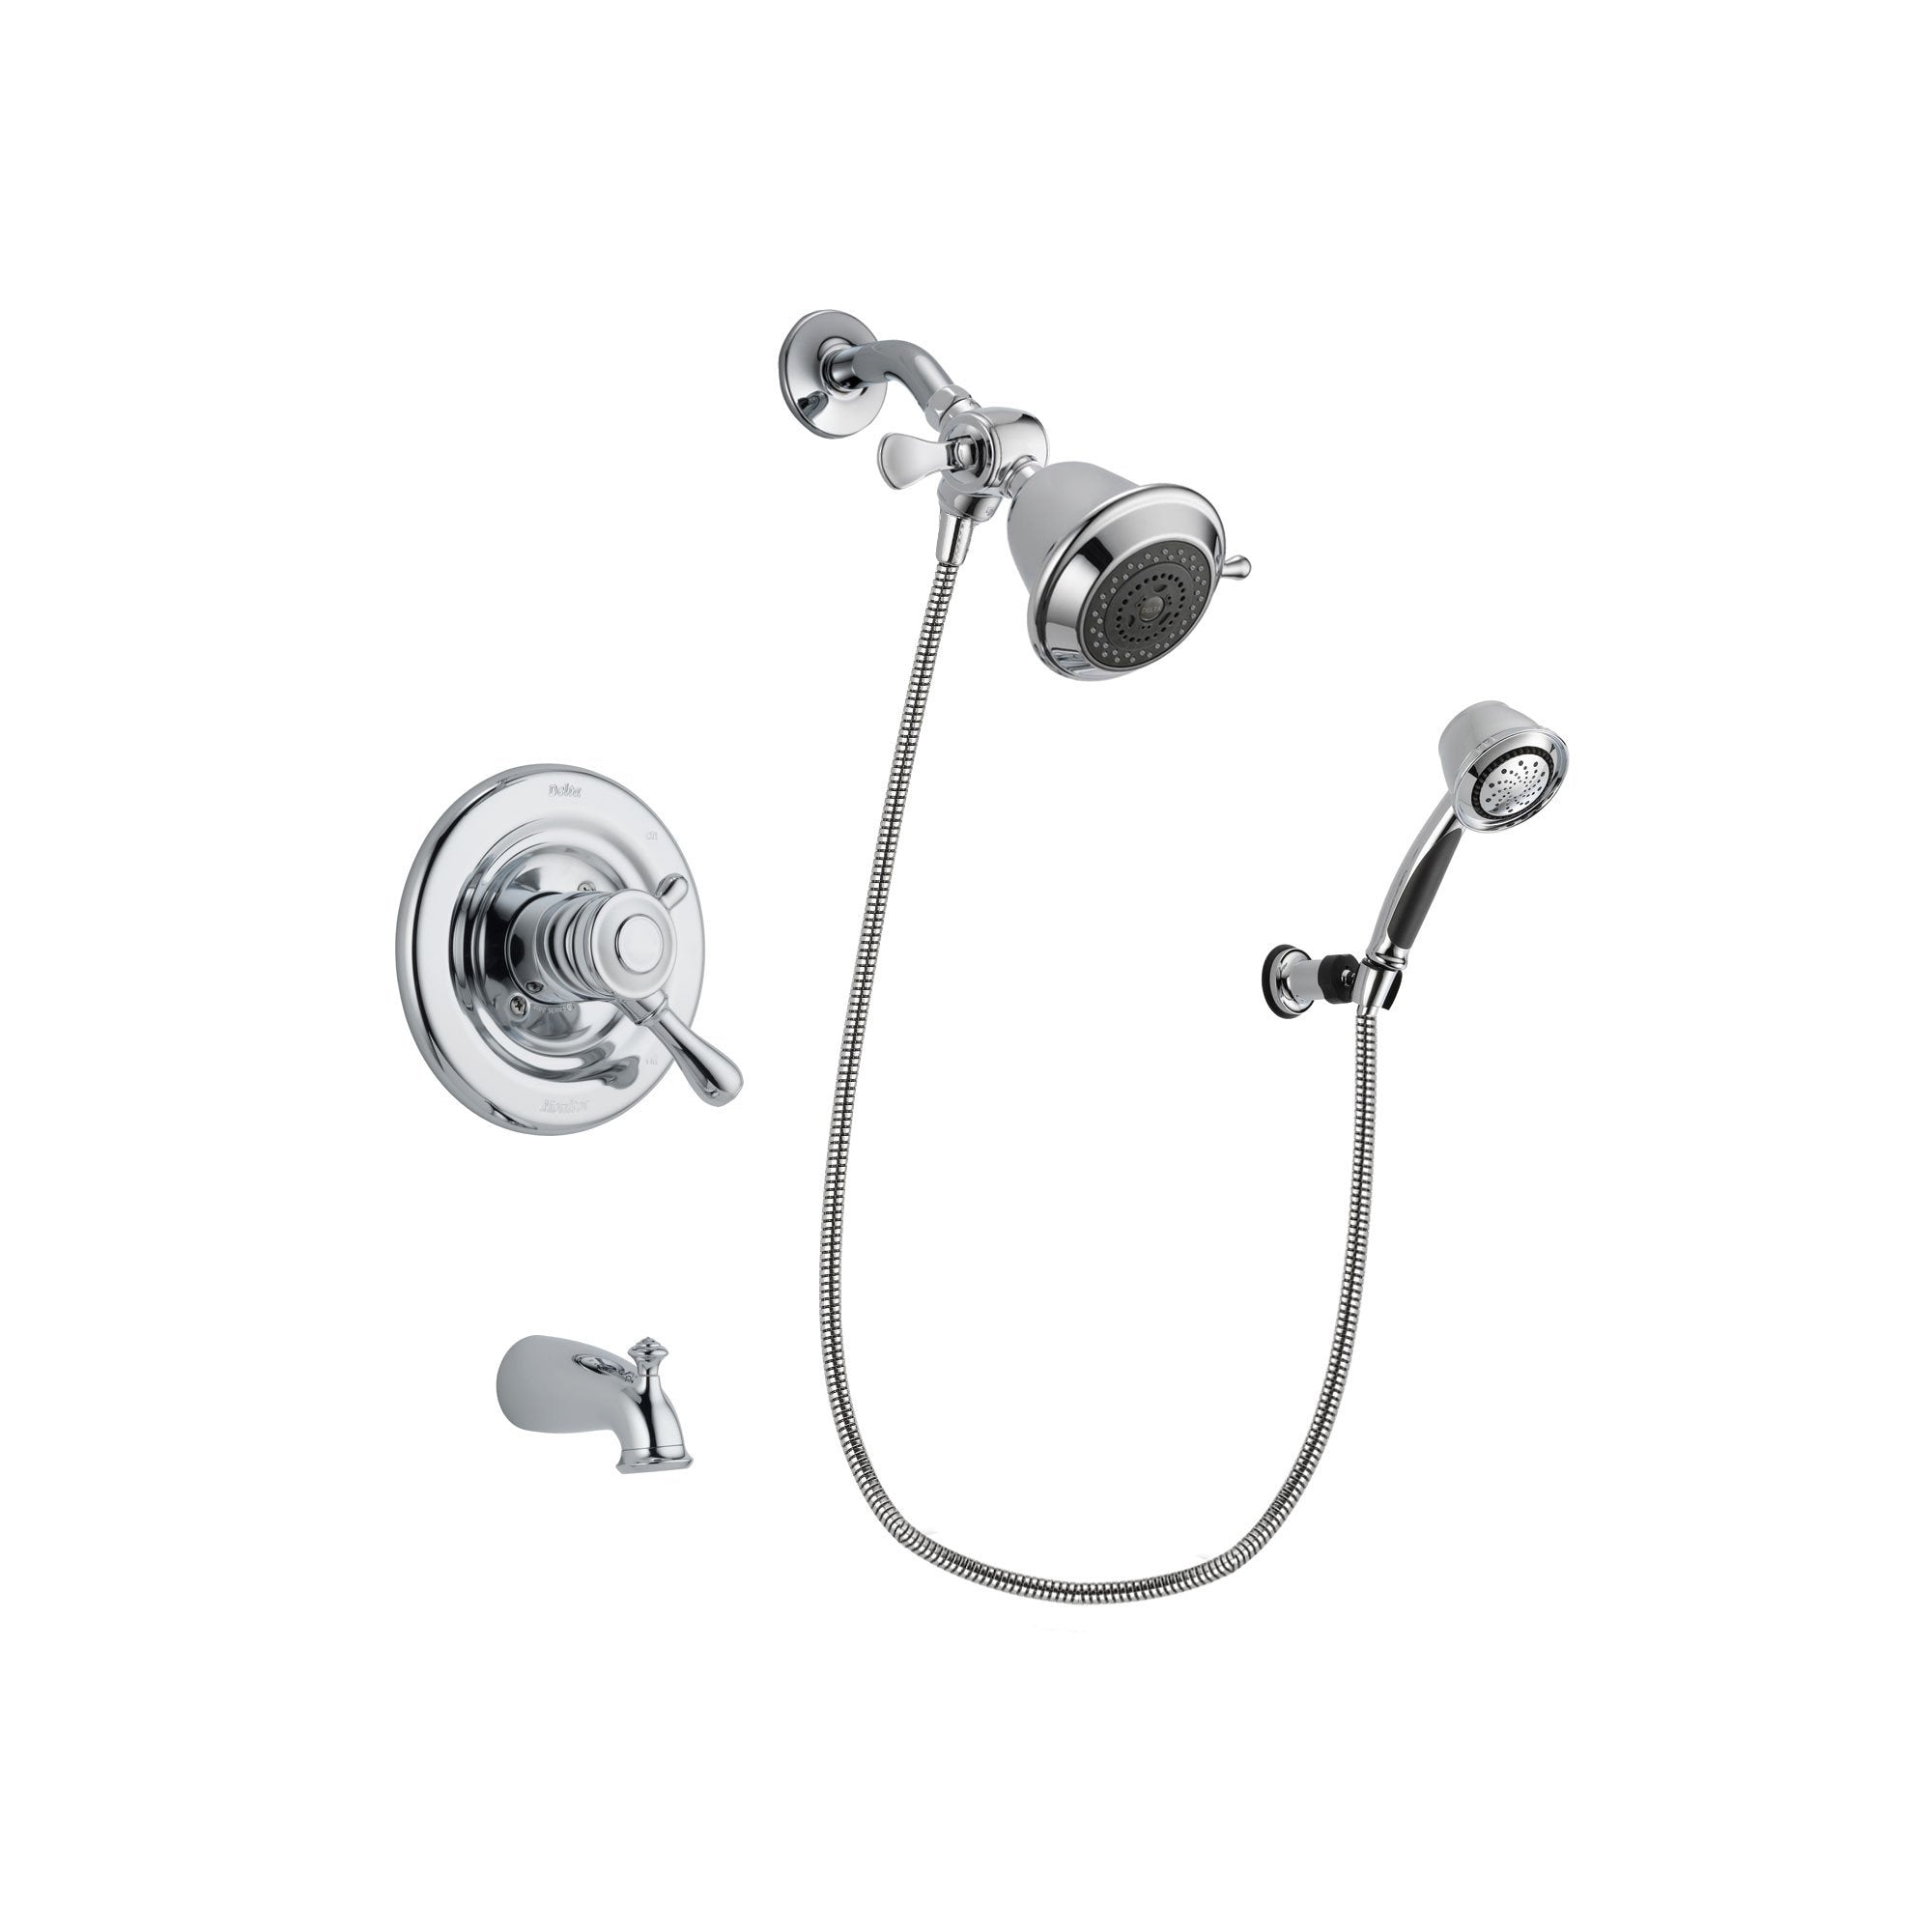 Delta Leland Chrome Finish Dual Control Tub and Shower Faucet System Package with Shower Head and 5-Spray Adjustable Wall Mount Hand Shower Includes Rough-in Valve and Tub Spout DSP0315V